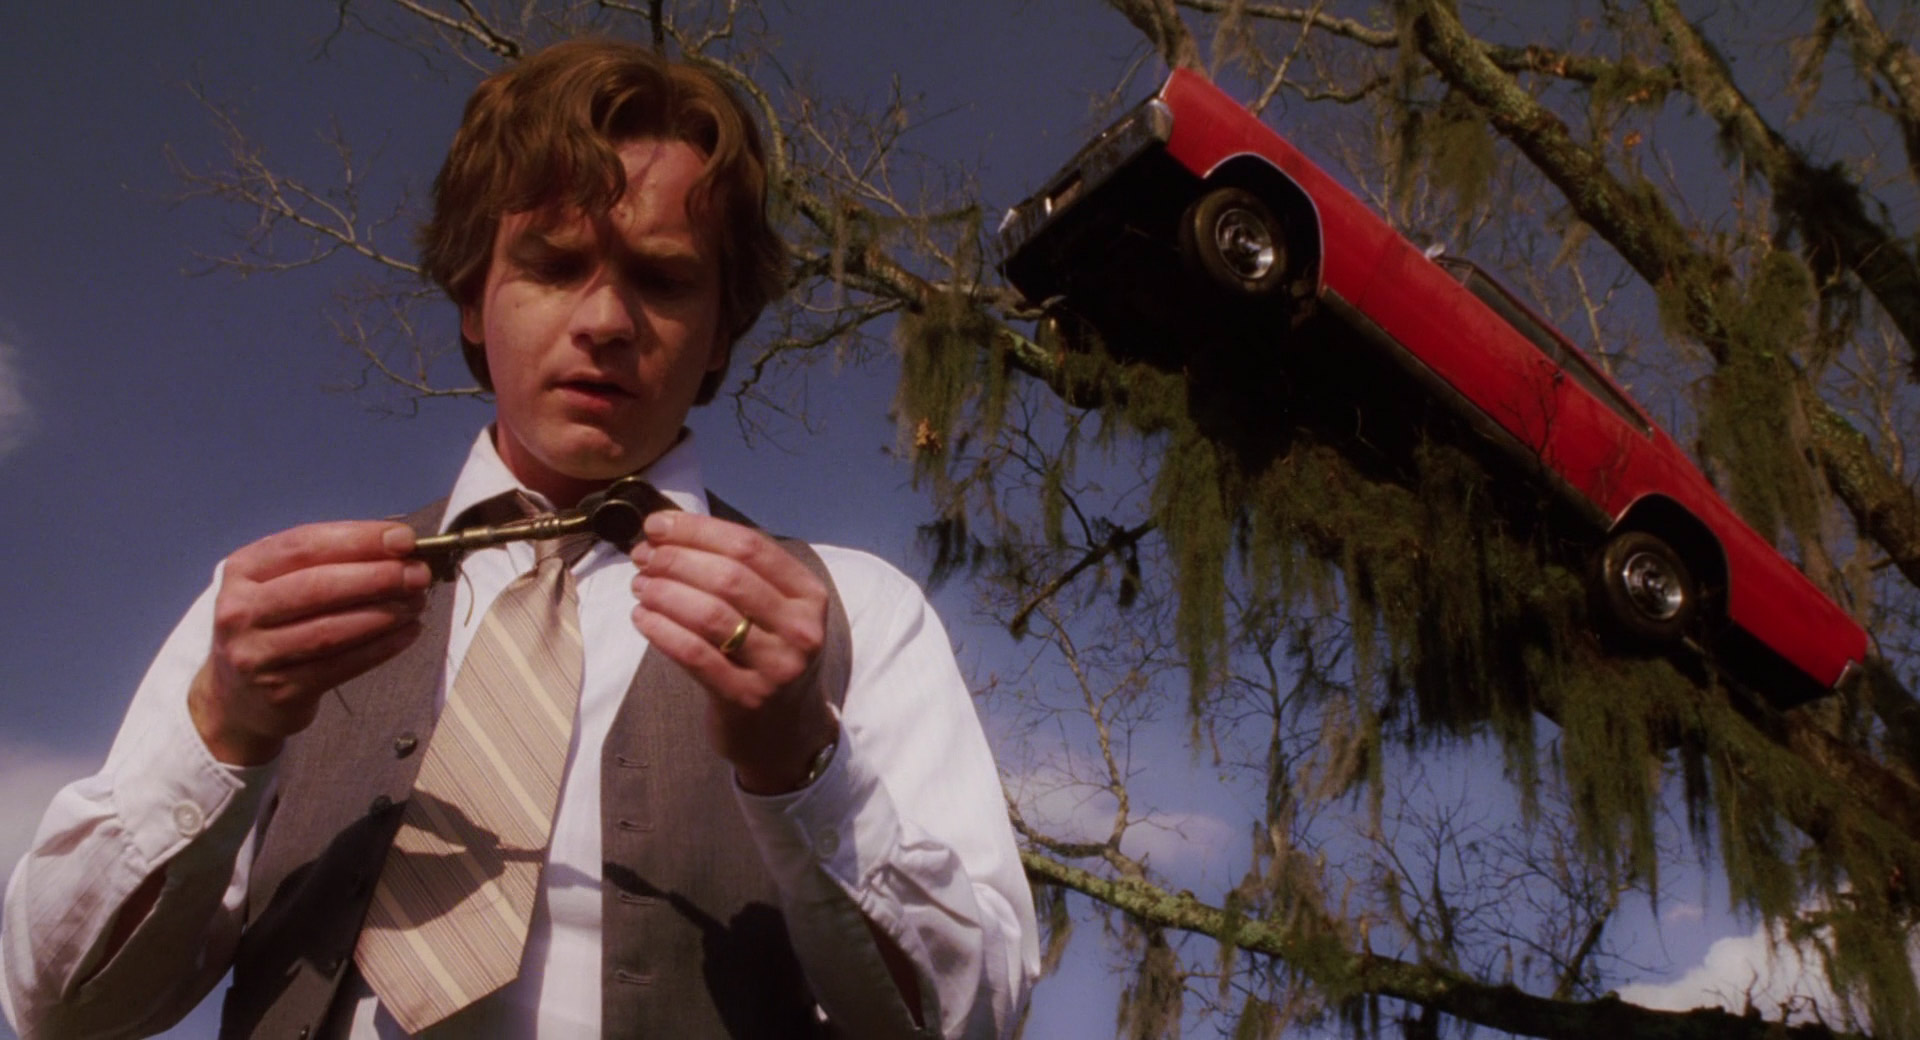 A still from the 2003 film "Big Fush" in which protagonist Edward Bloom inspects a key while behind him, a car hangs suspended in the branches of a tree.